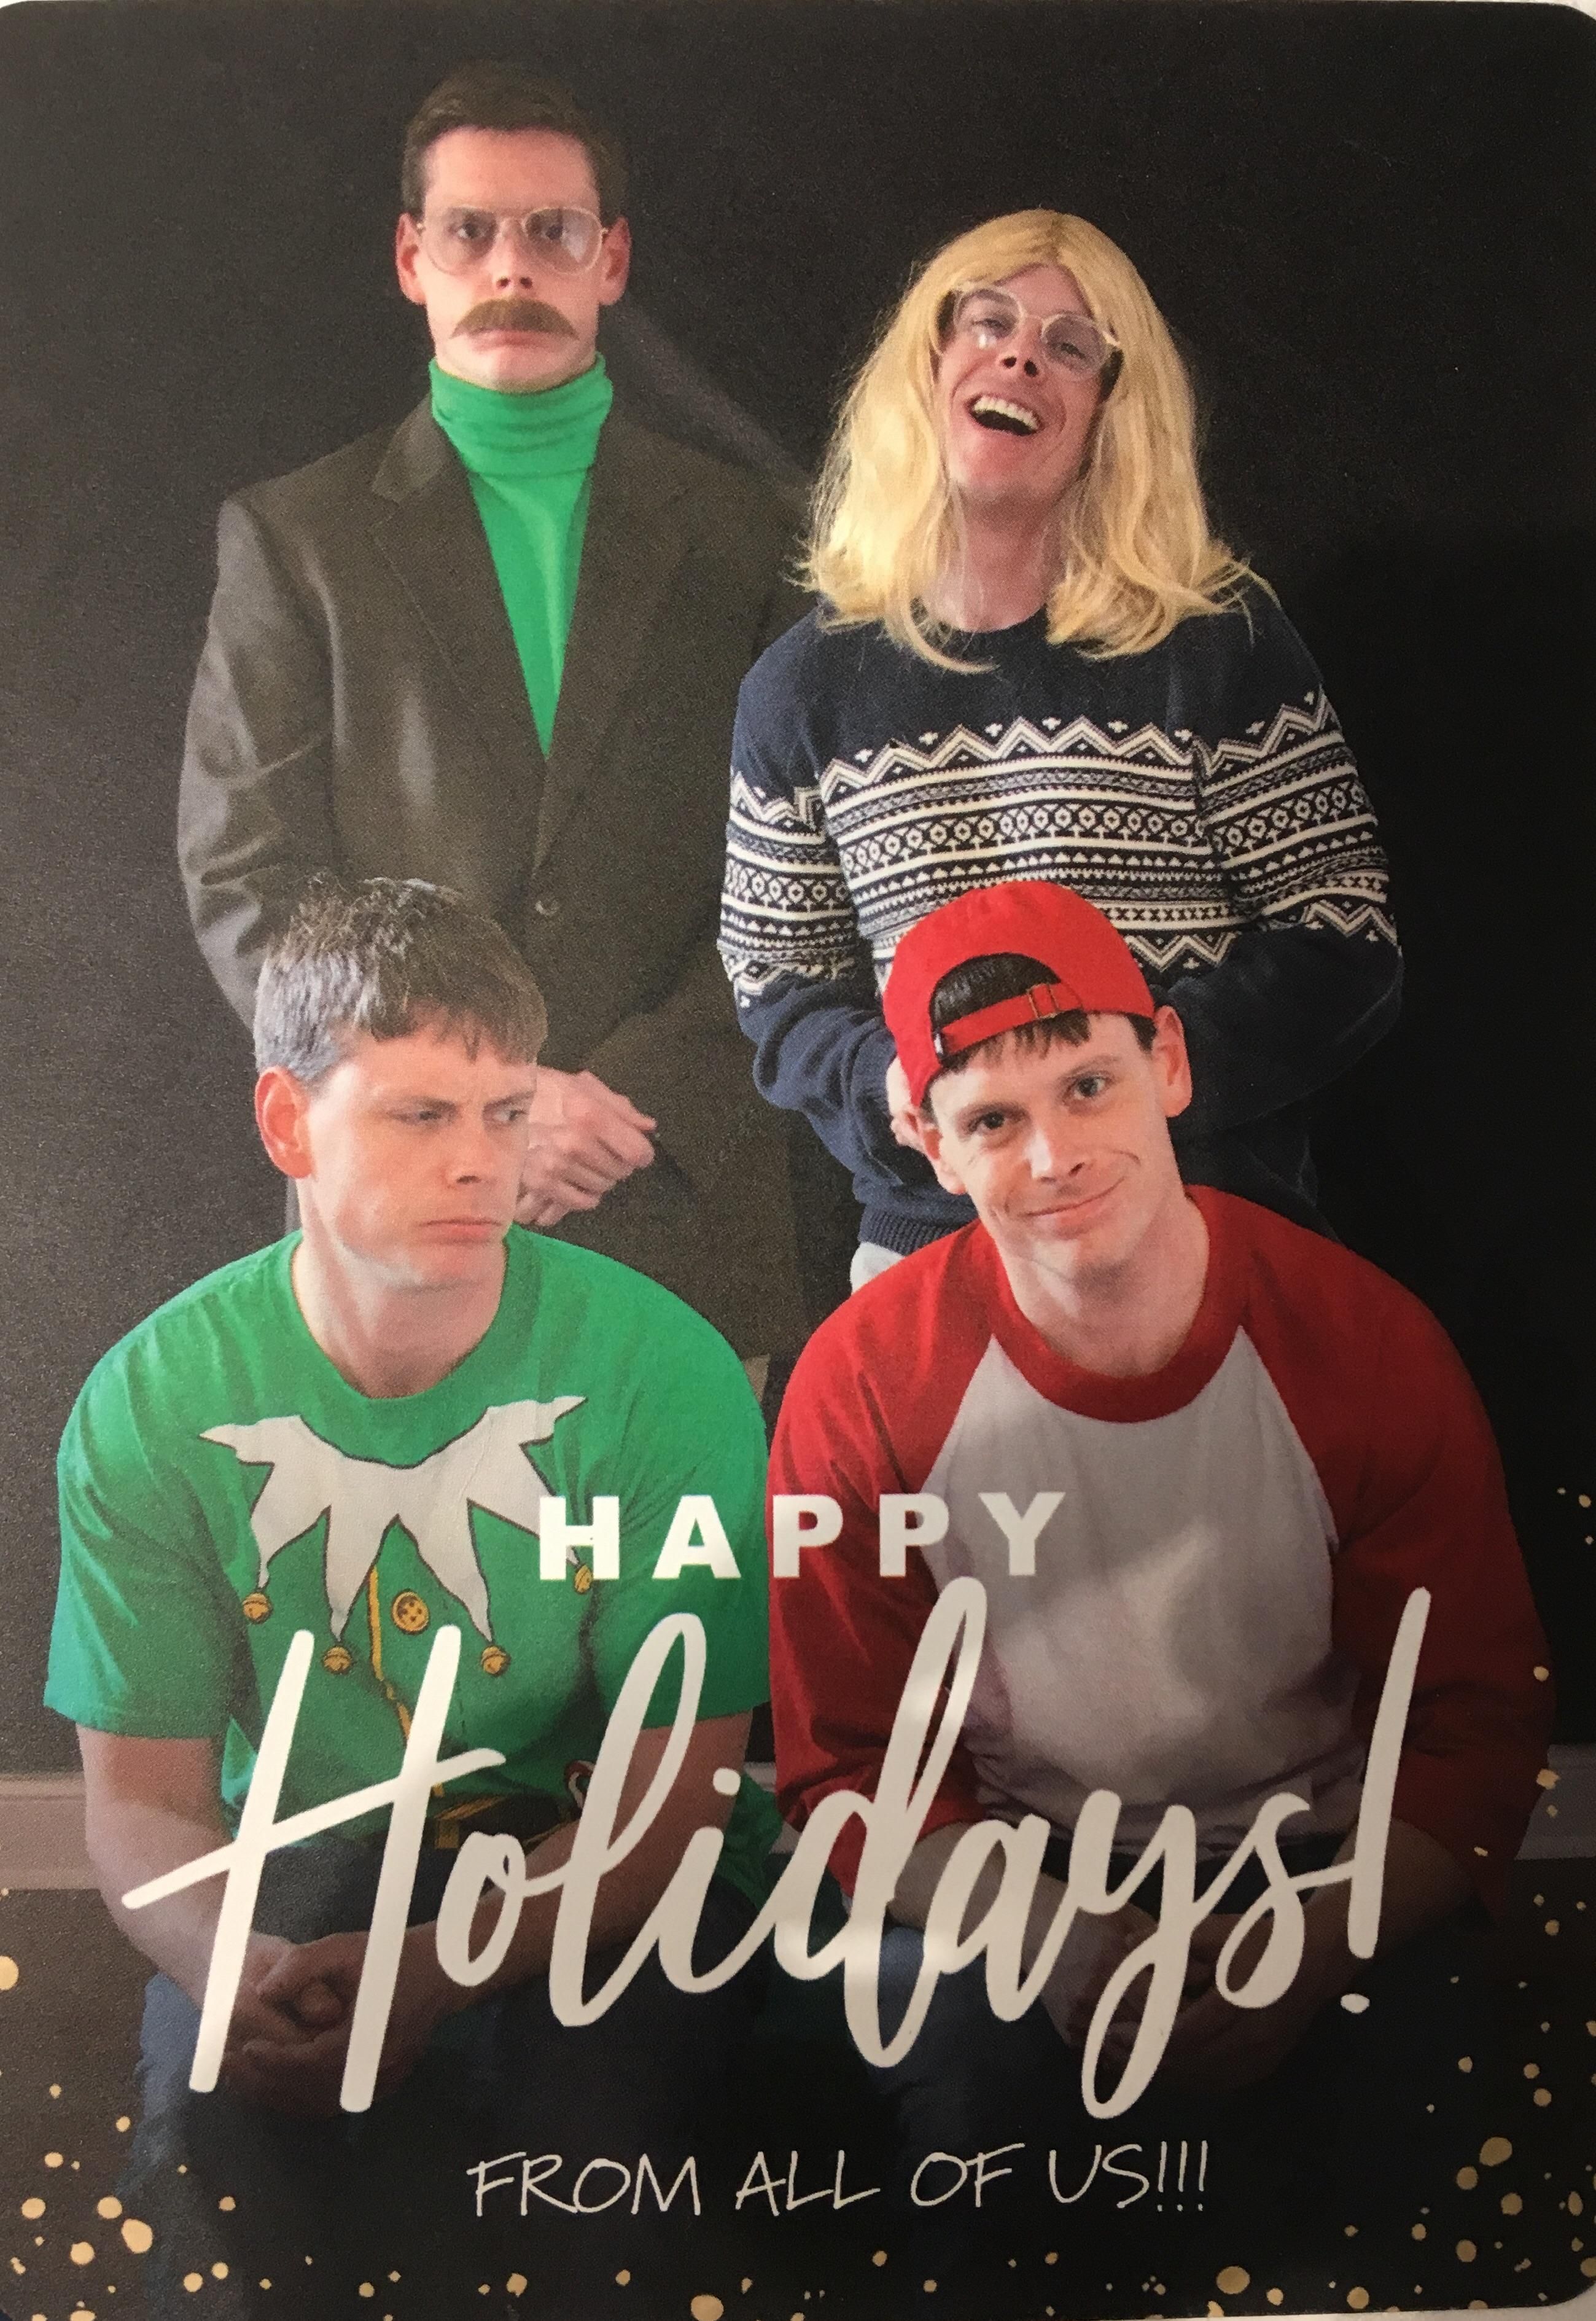 My coworker’s Christmas card he handed out today. He is leaving us Saturday to be a financial analyst. I’ll miss this weirdo.